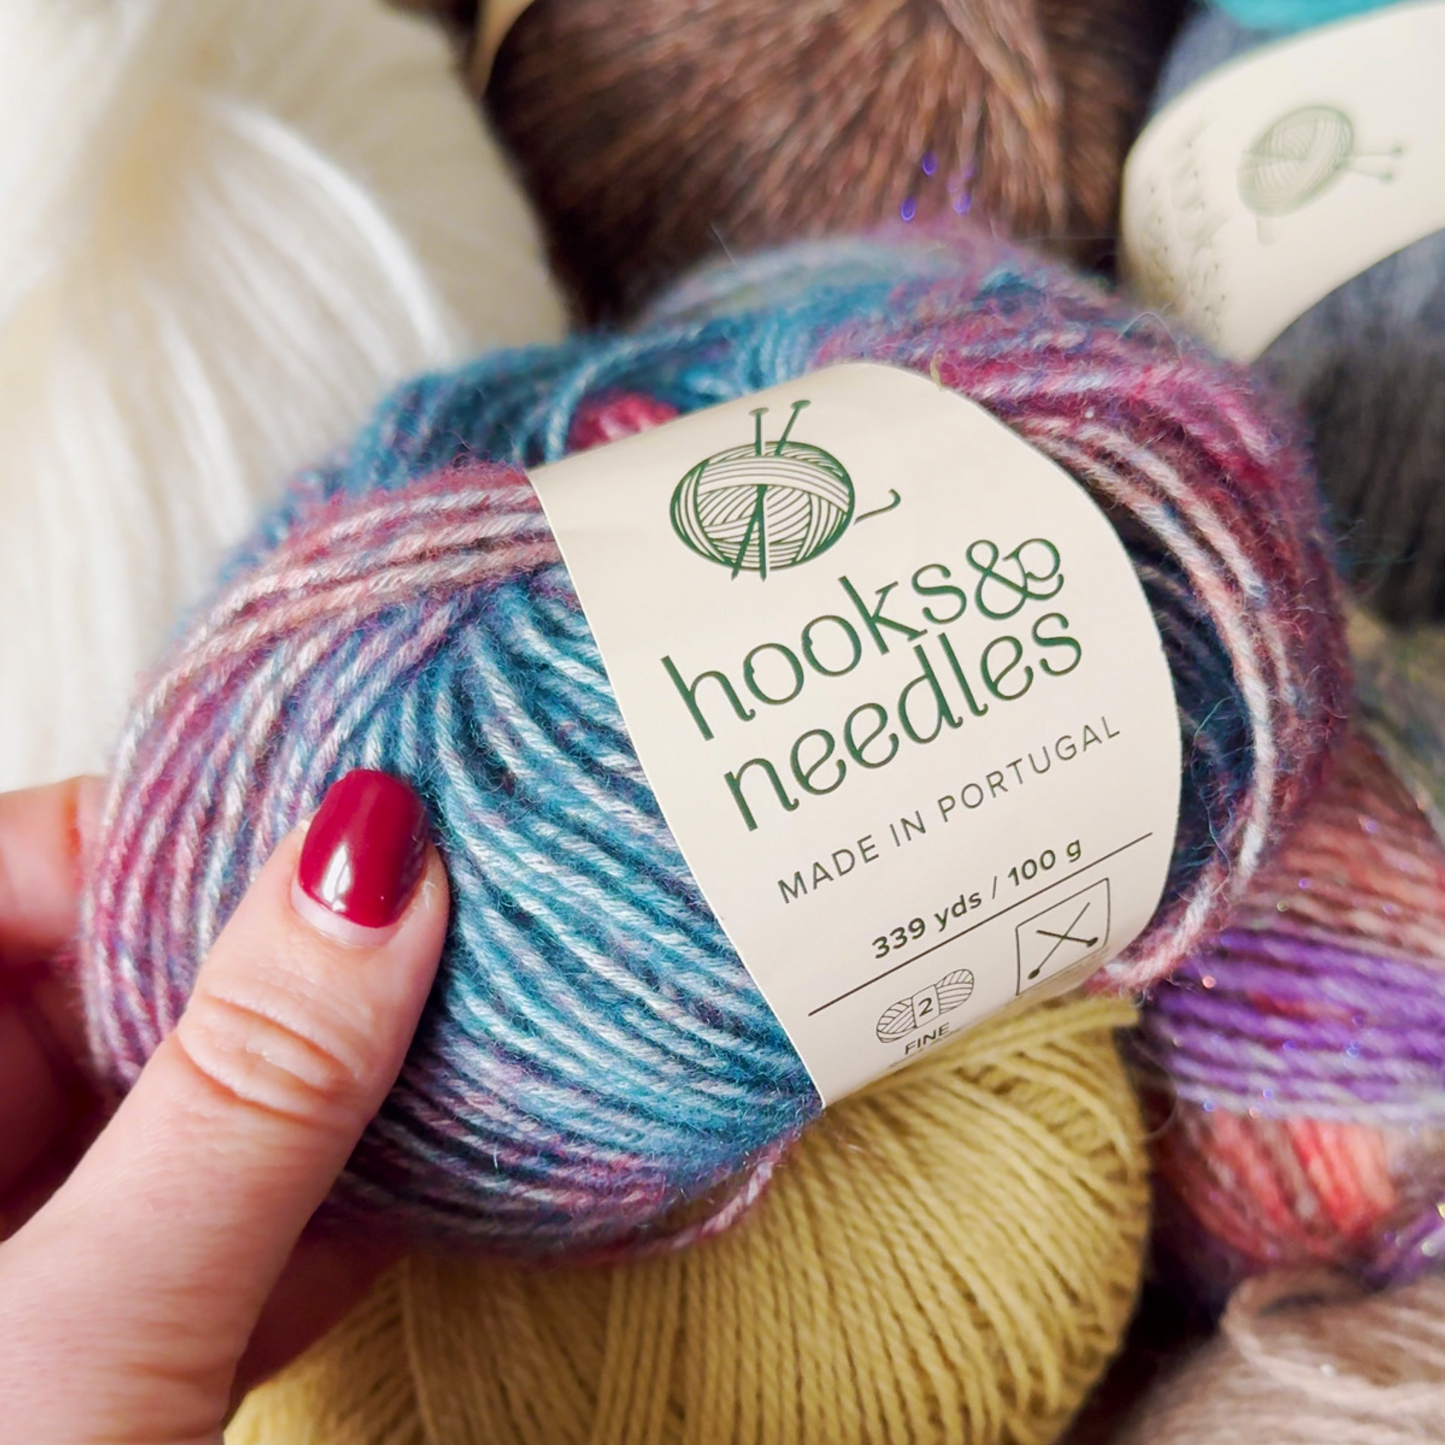 A hand holding a skein of multicolored yarn labeled "6-Month-Prepaid Hooks & Needles Subscription Box #26, made in Portugal" with other yarn skeins in the background.